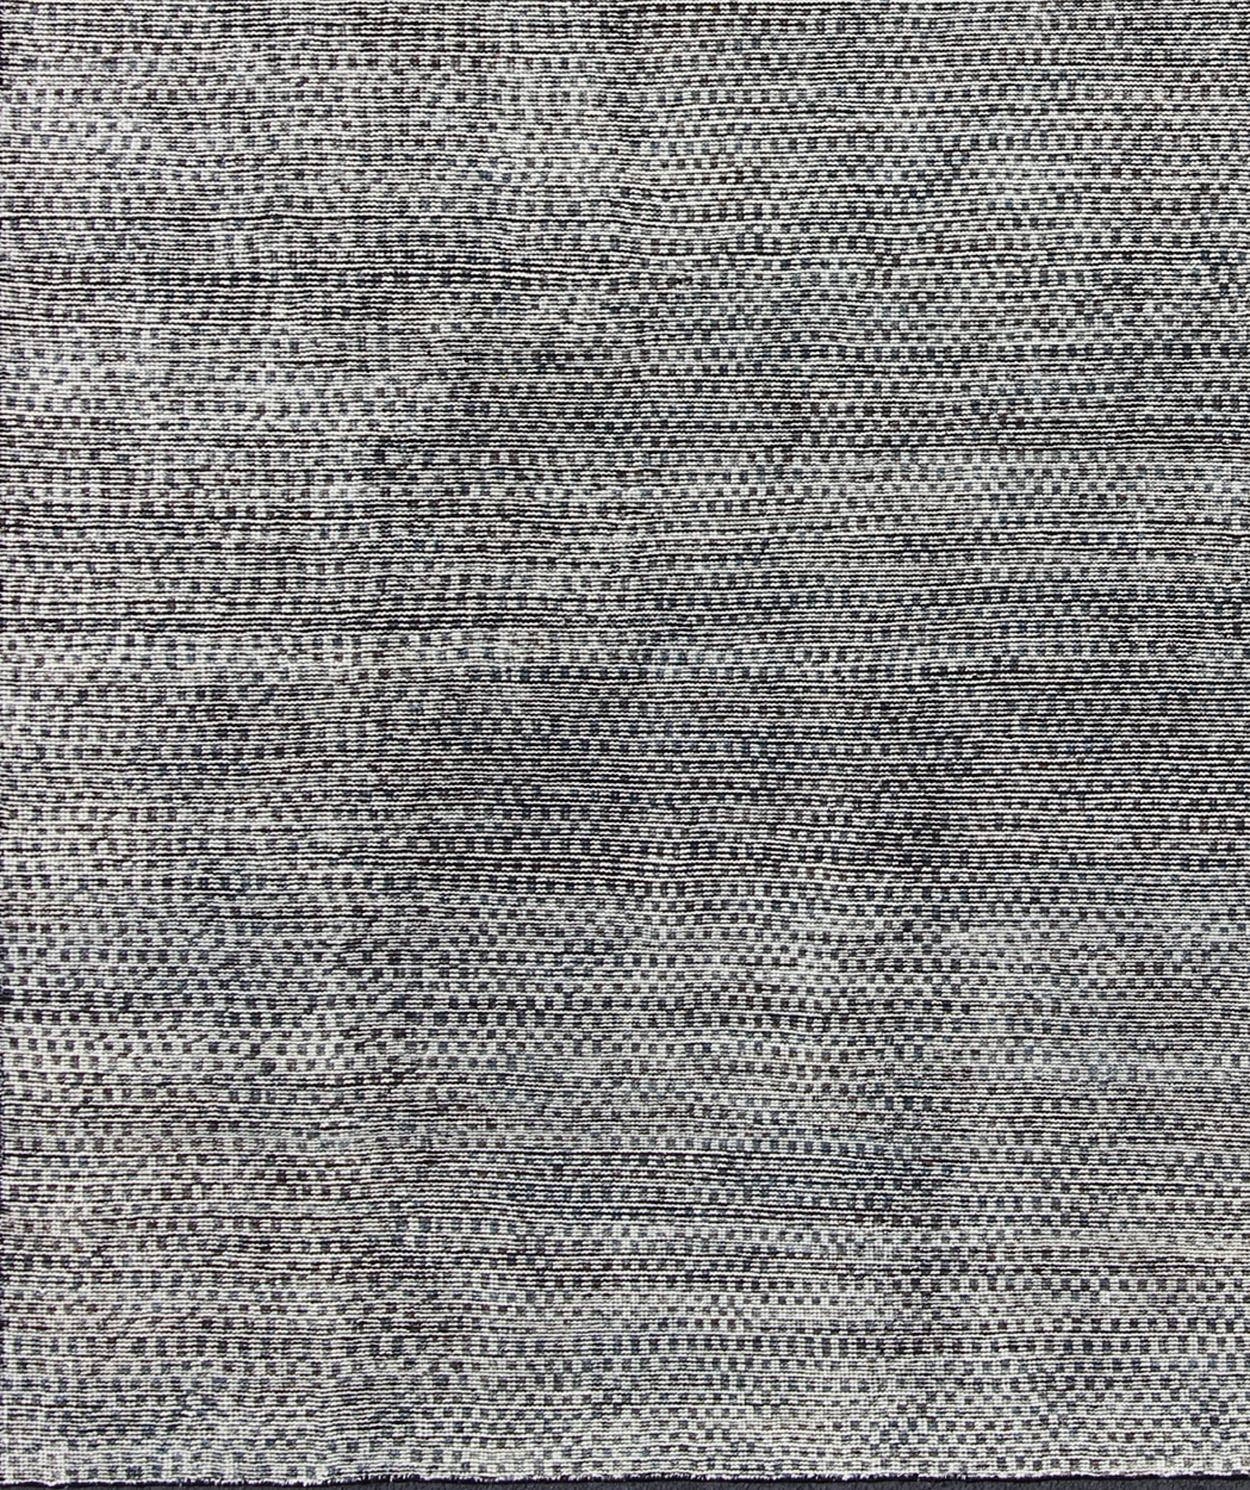 Shades of gray, white and charcoal in this modern design distressed rug.  rug/khn-506-tr-577, country of origin  / Scandinavian Modern Piled distressed Rug.

This rug gets inspirations from abstract and modern designs with a distressed pile. With a